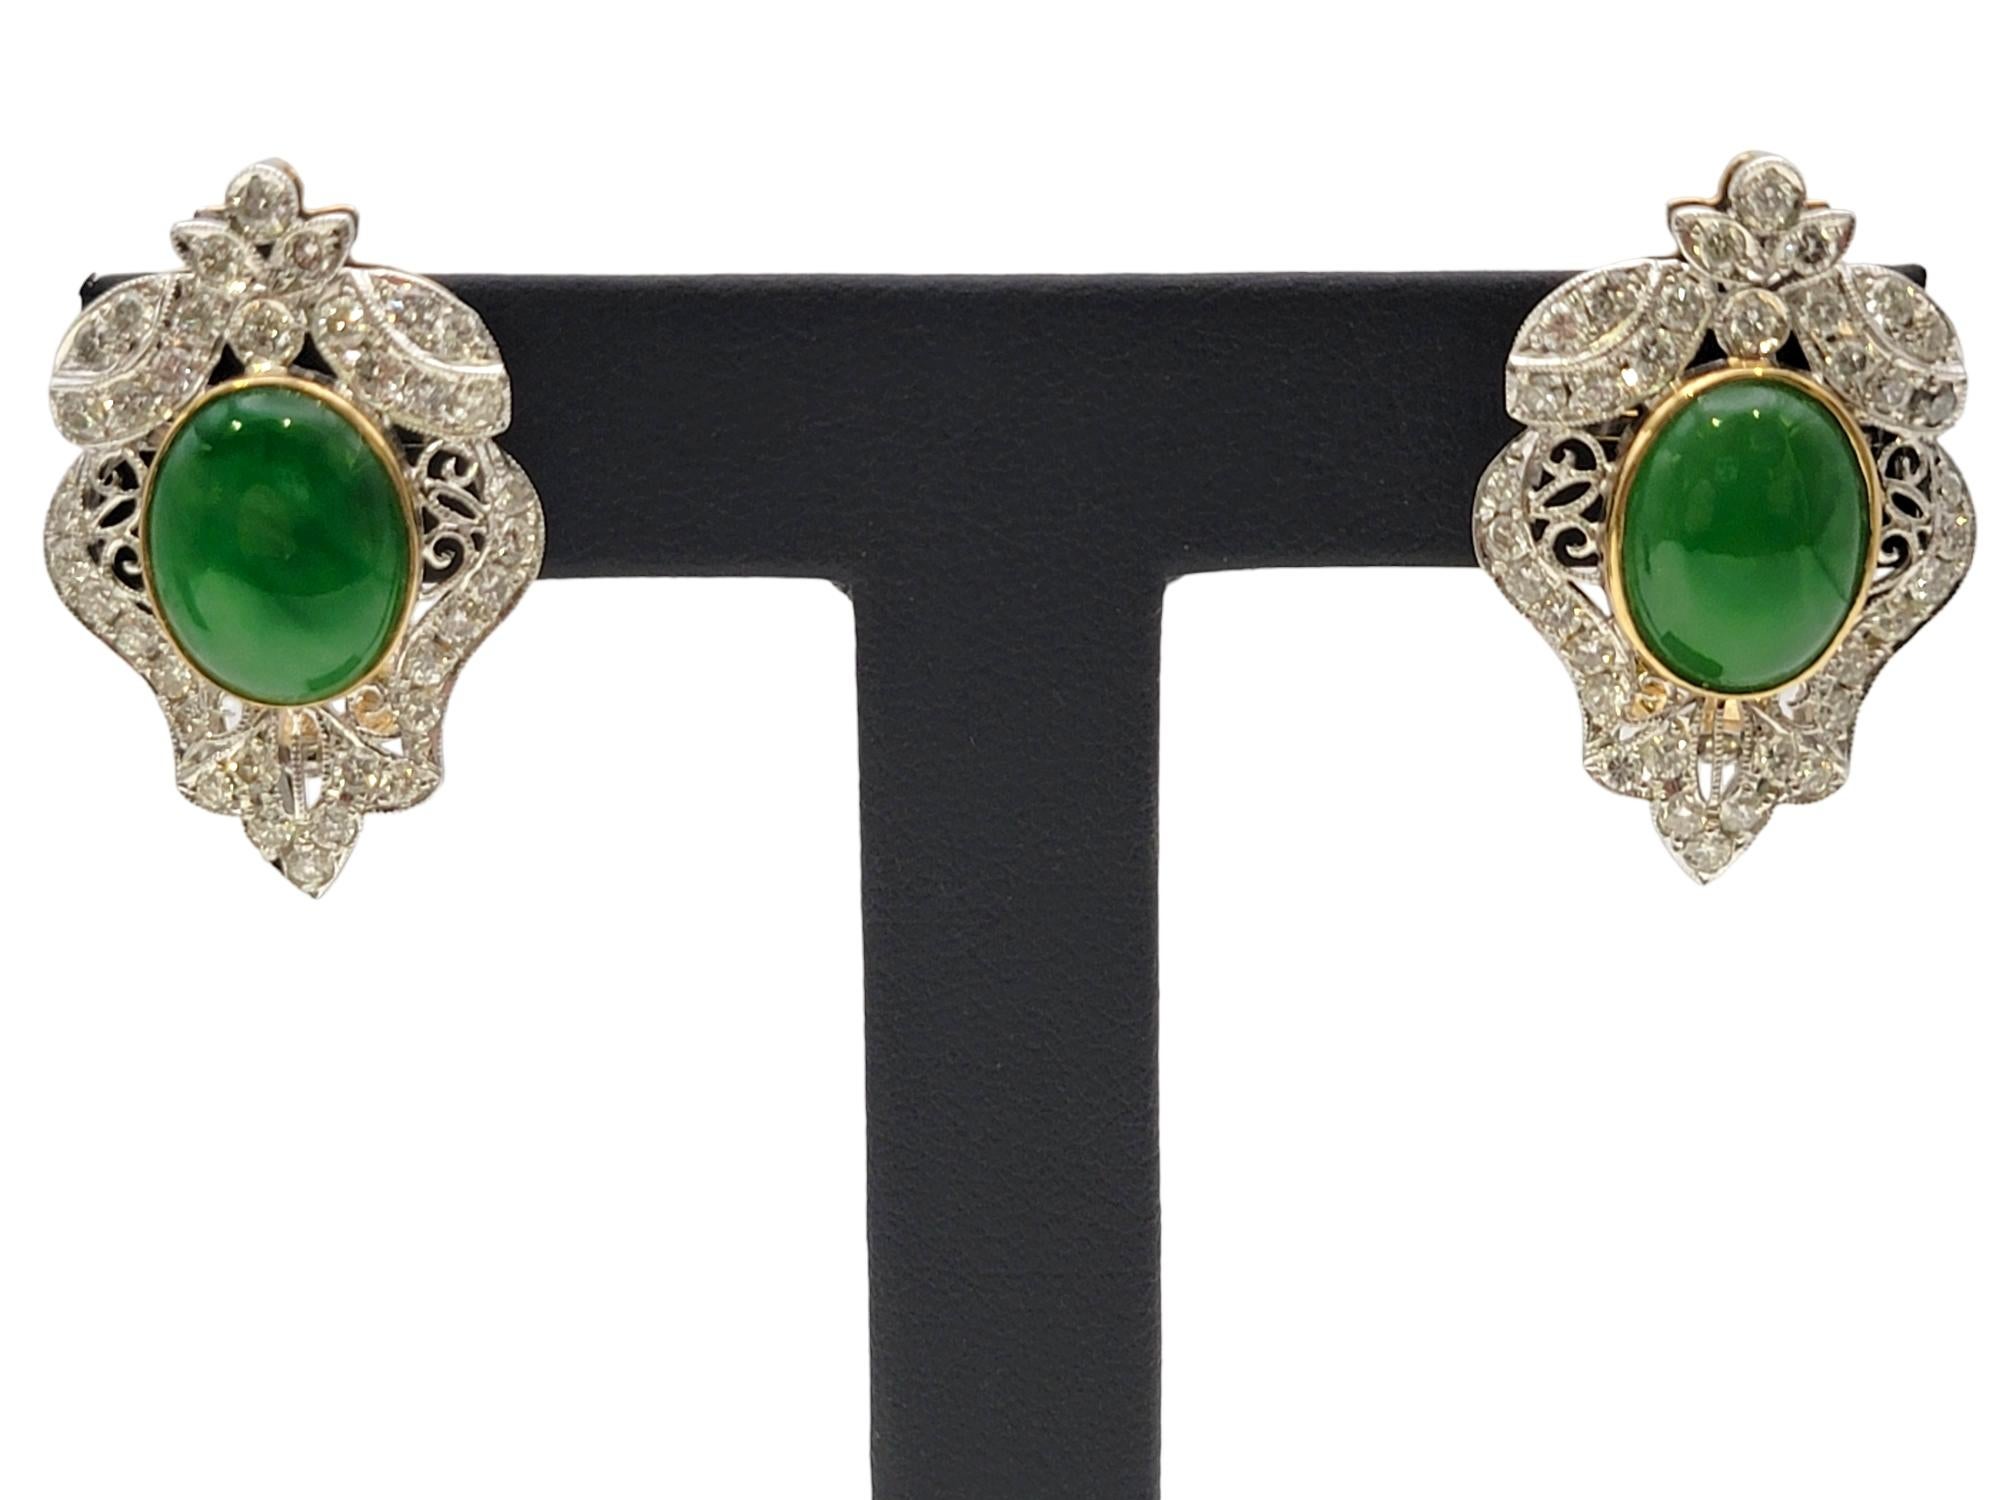 Vintage Style Cabochon Jade and Pave Diamond Pierced Earrings in 18 Karat Gold For Sale 6